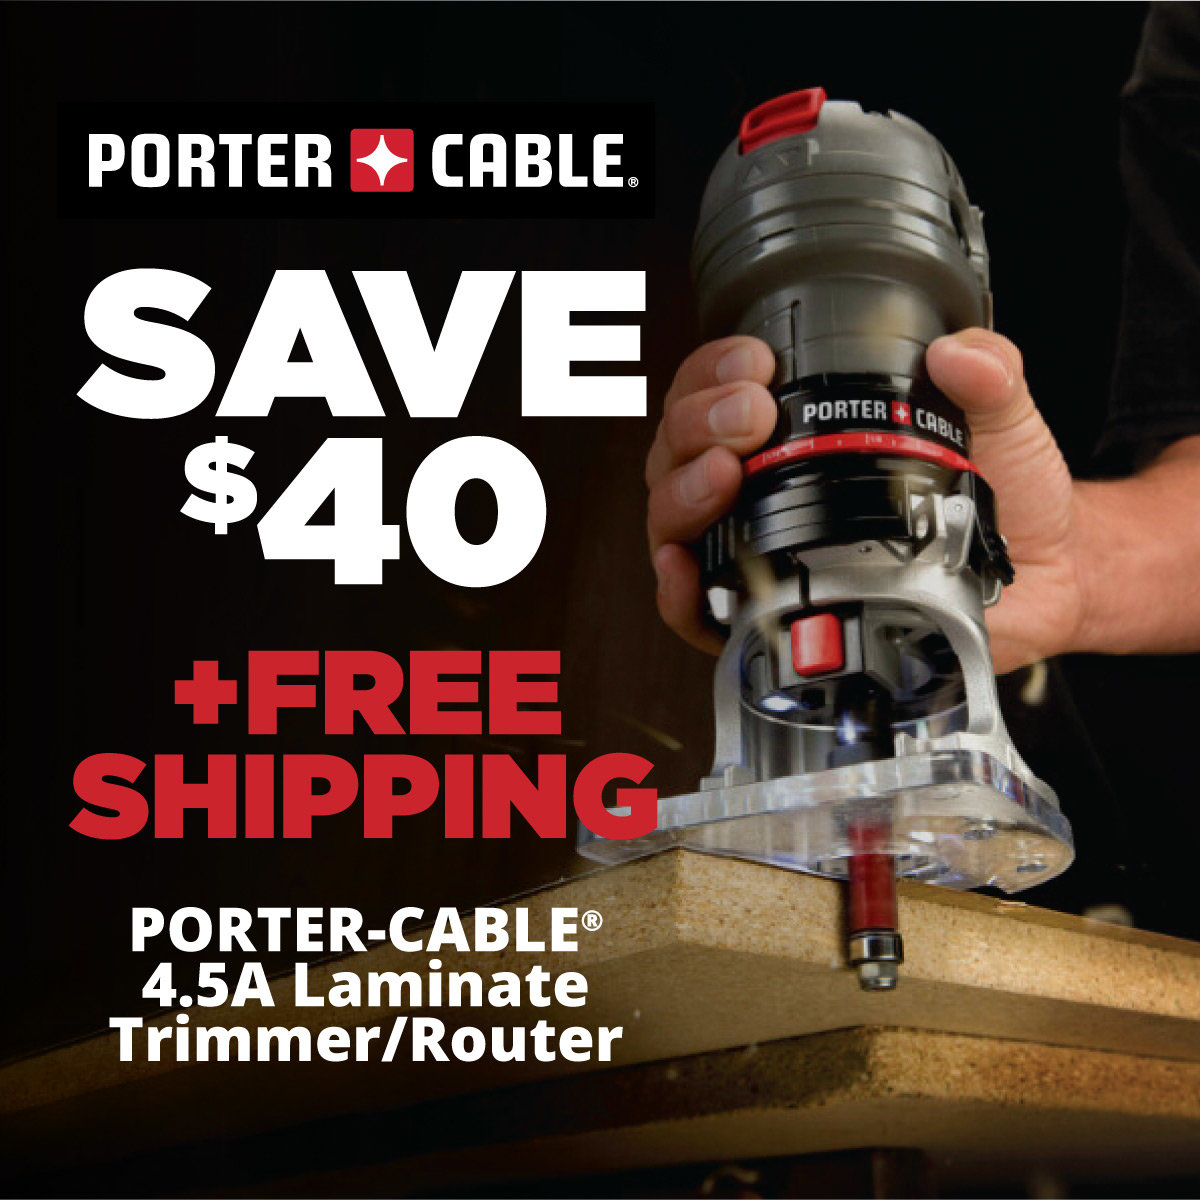 Save $40 Plus Free Shipping on Porter-Cable 4.5A Laminate Trimmer/Router